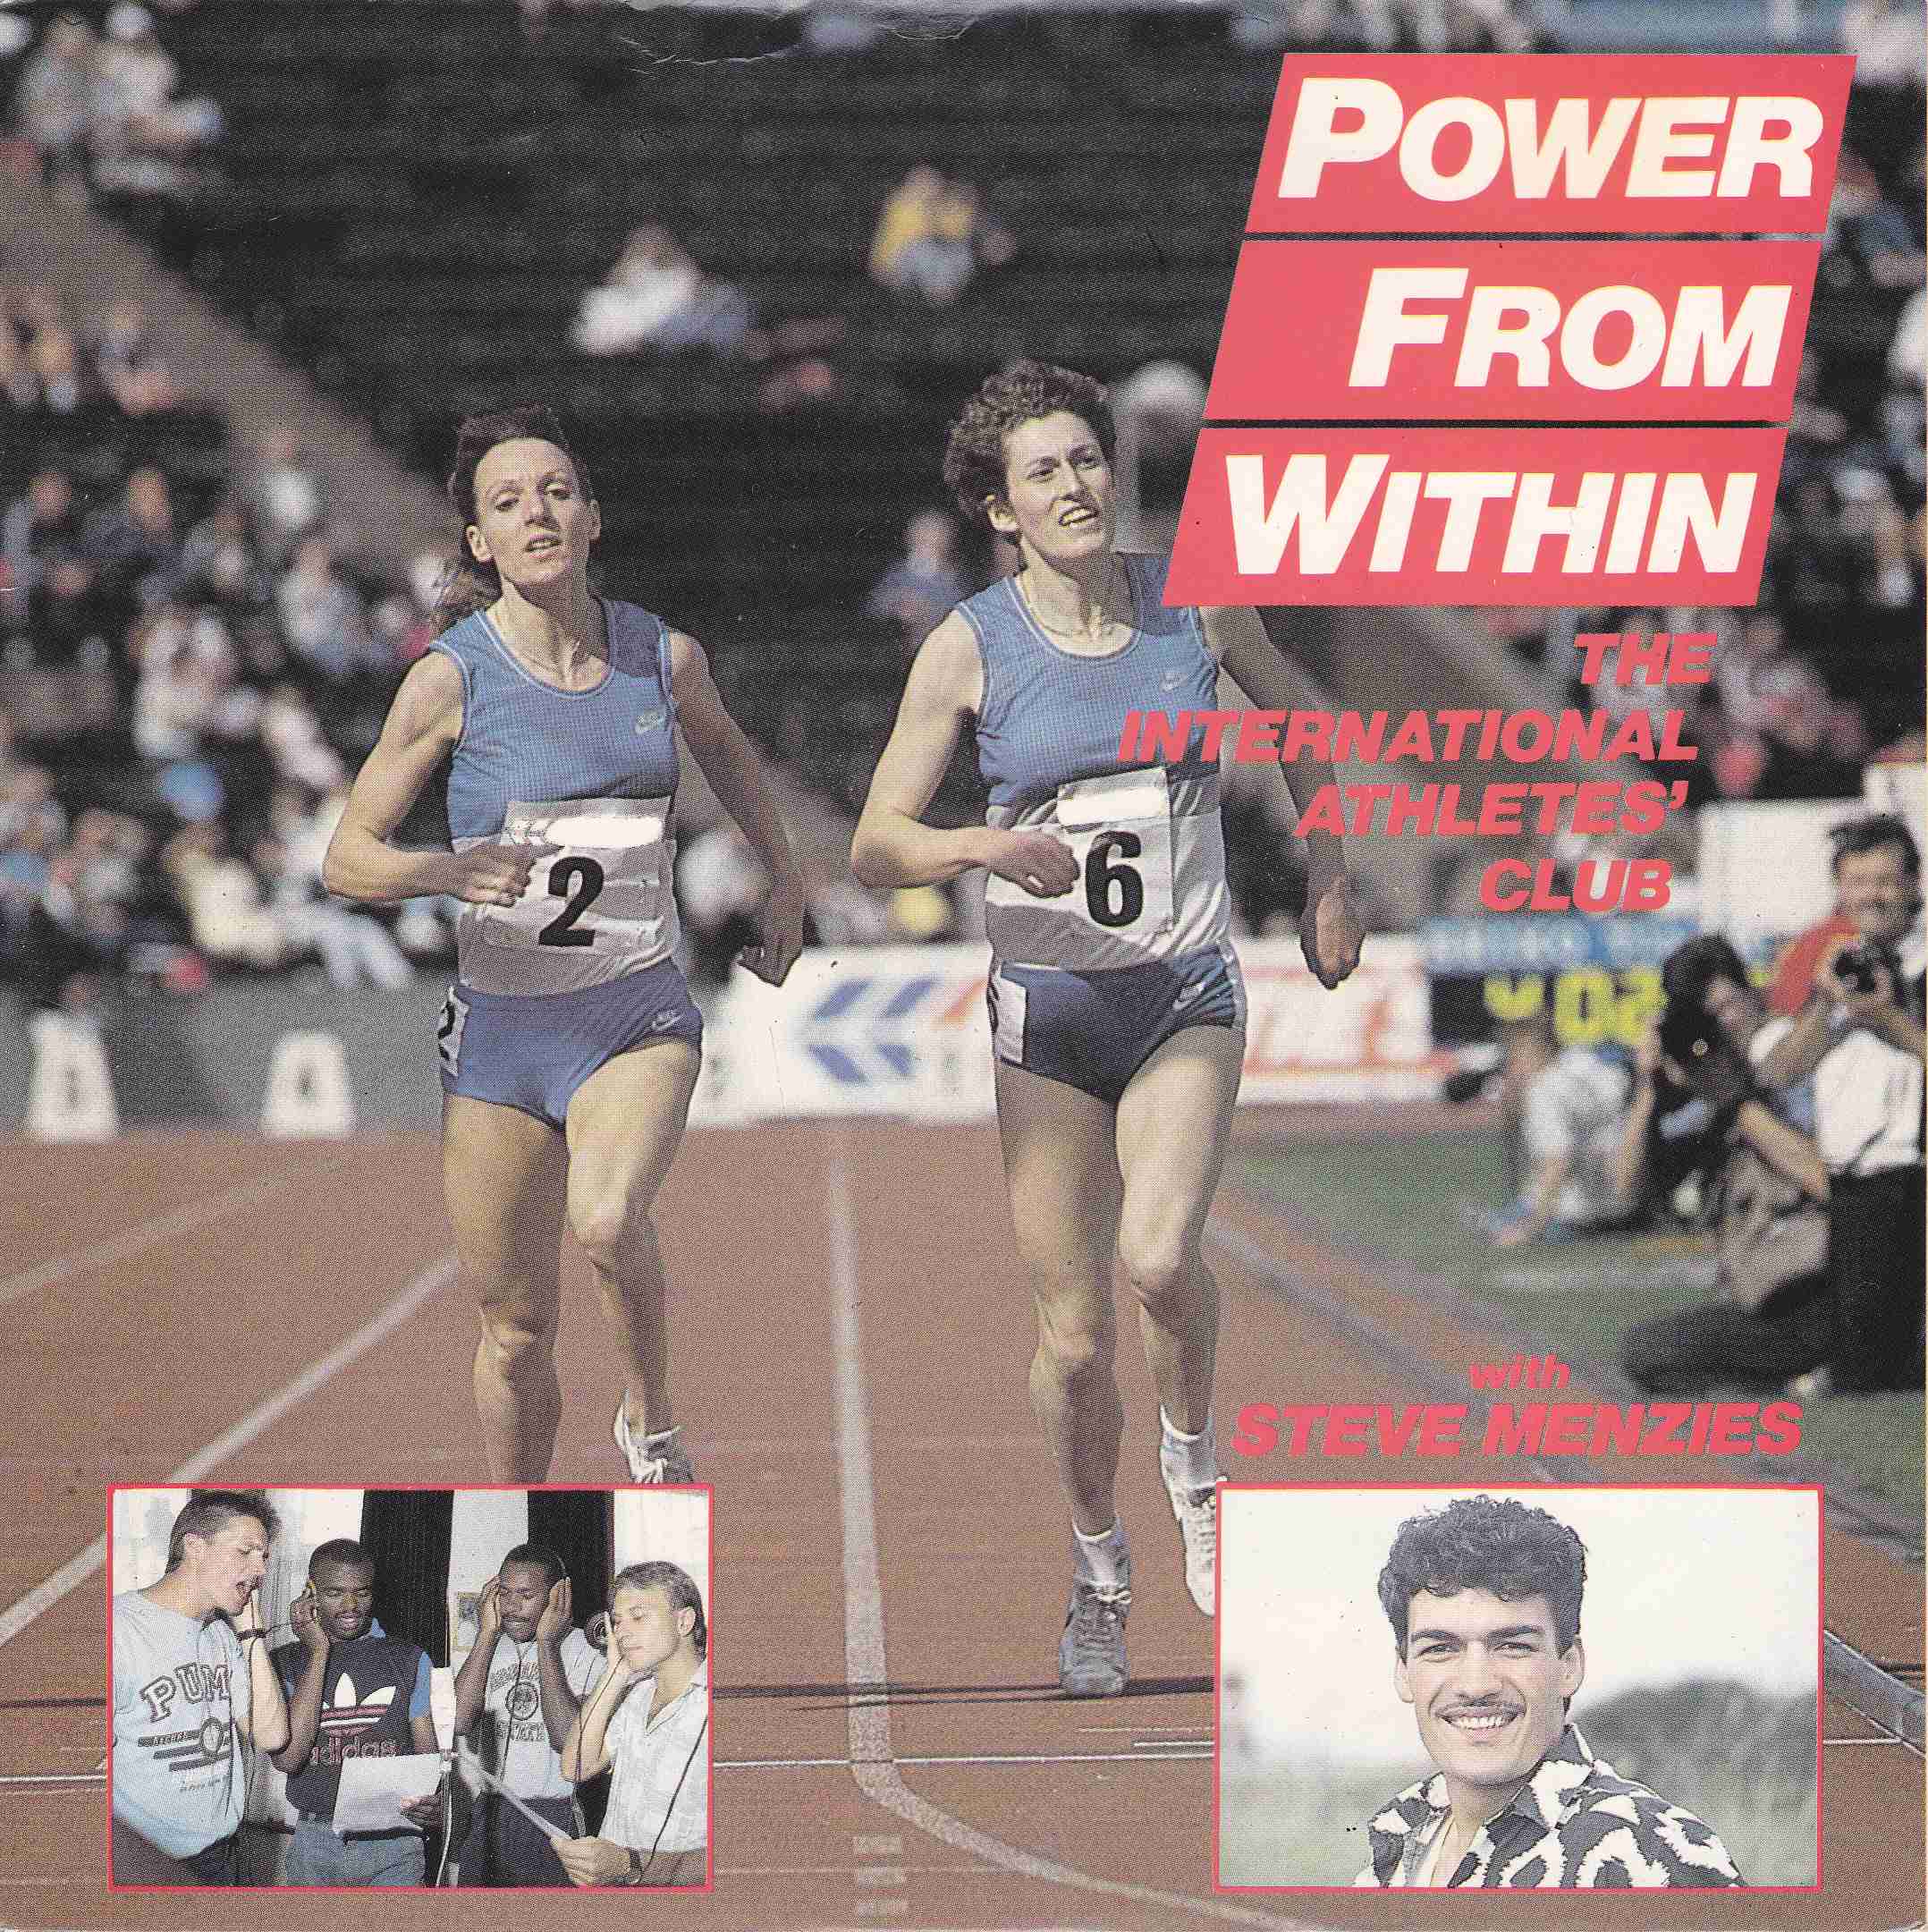 Picture of 12 RSL 198 Power from within by artist The International Athletes' Club With Steve Menzies from the BBC records and Tapes library